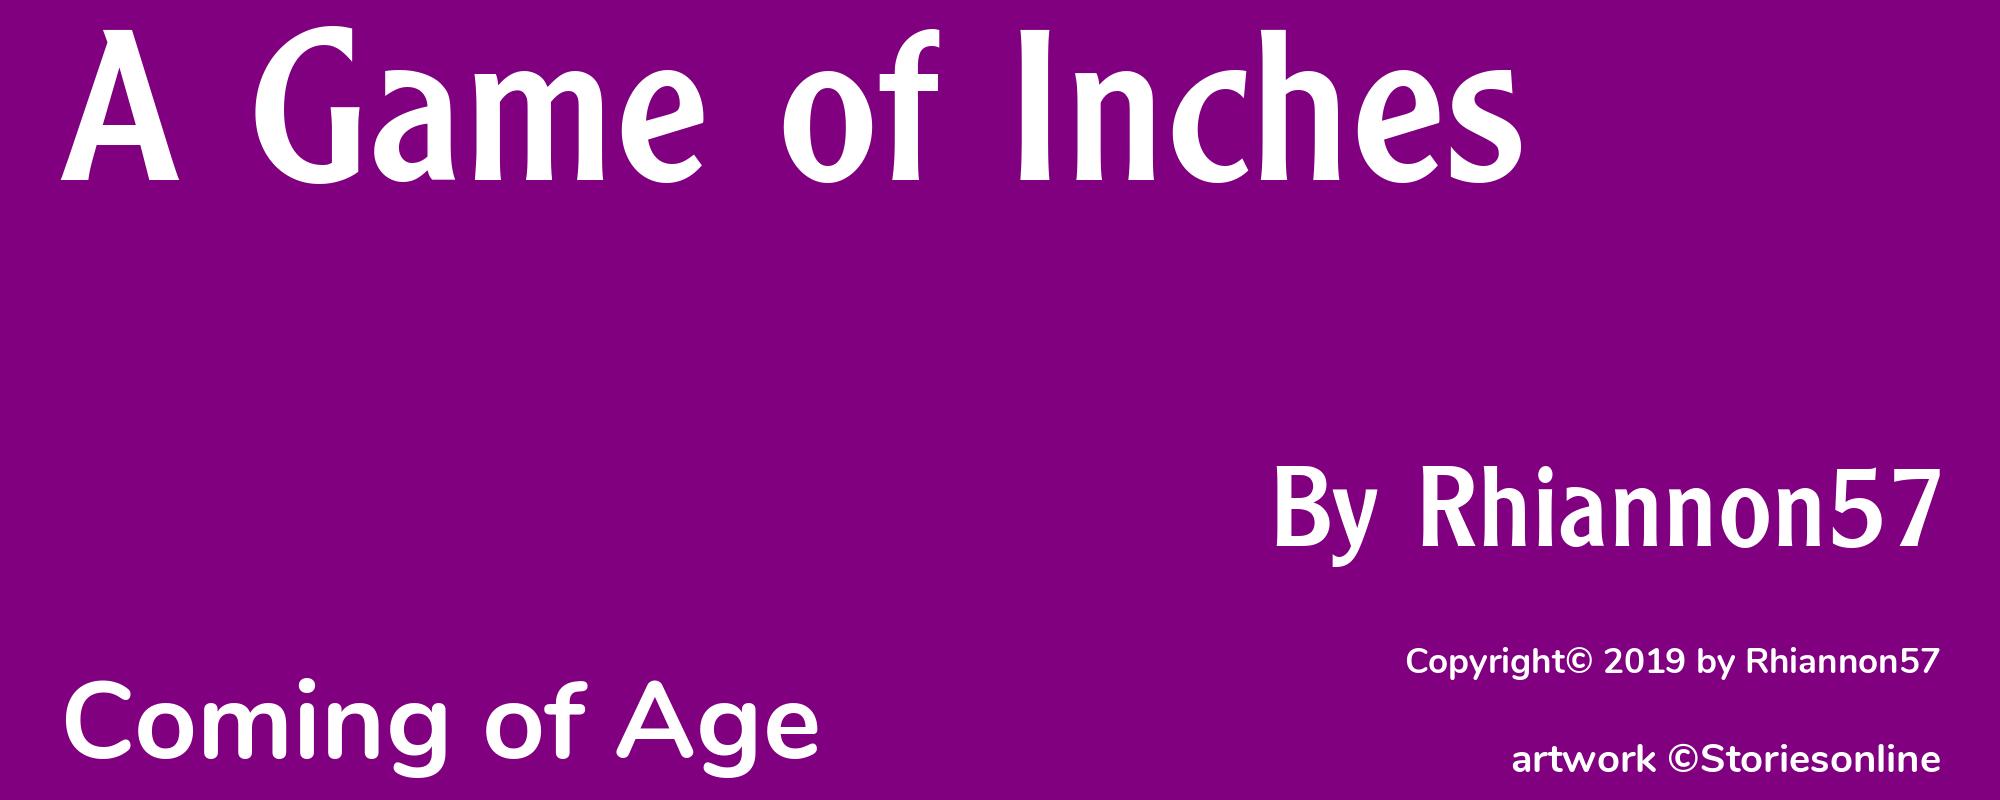 A Game of Inches - Cover